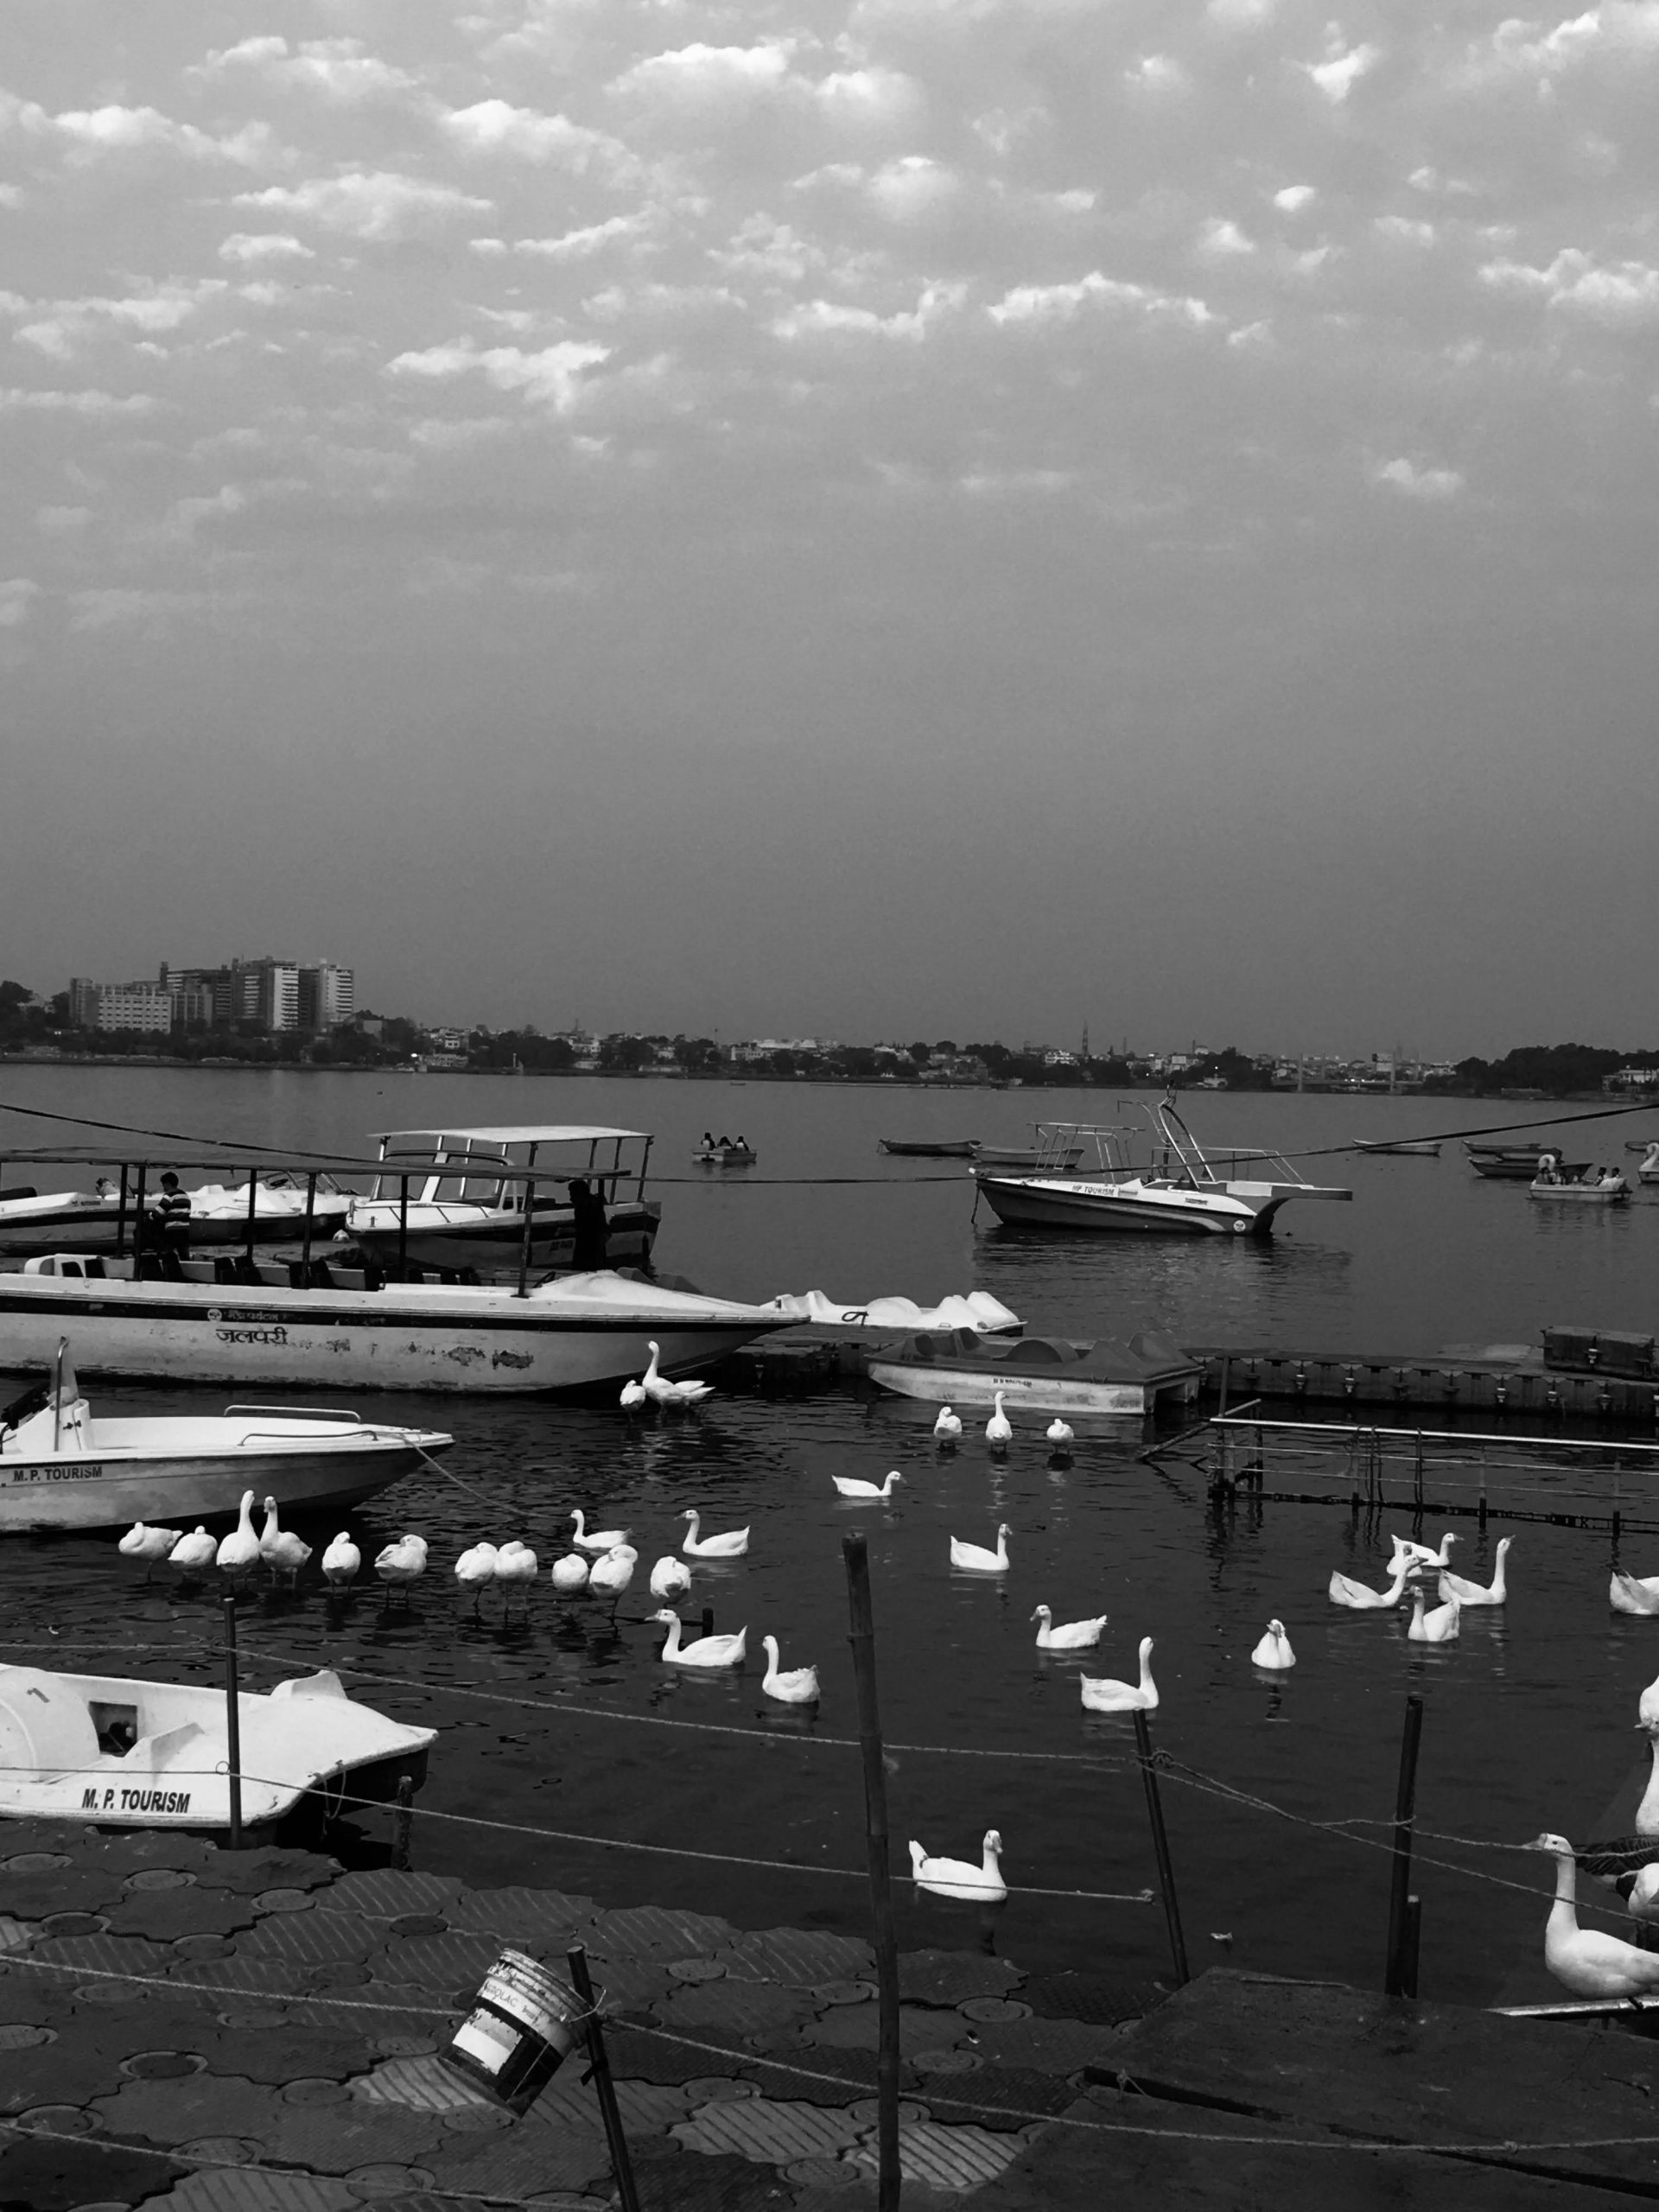 Swans and boats in black and white